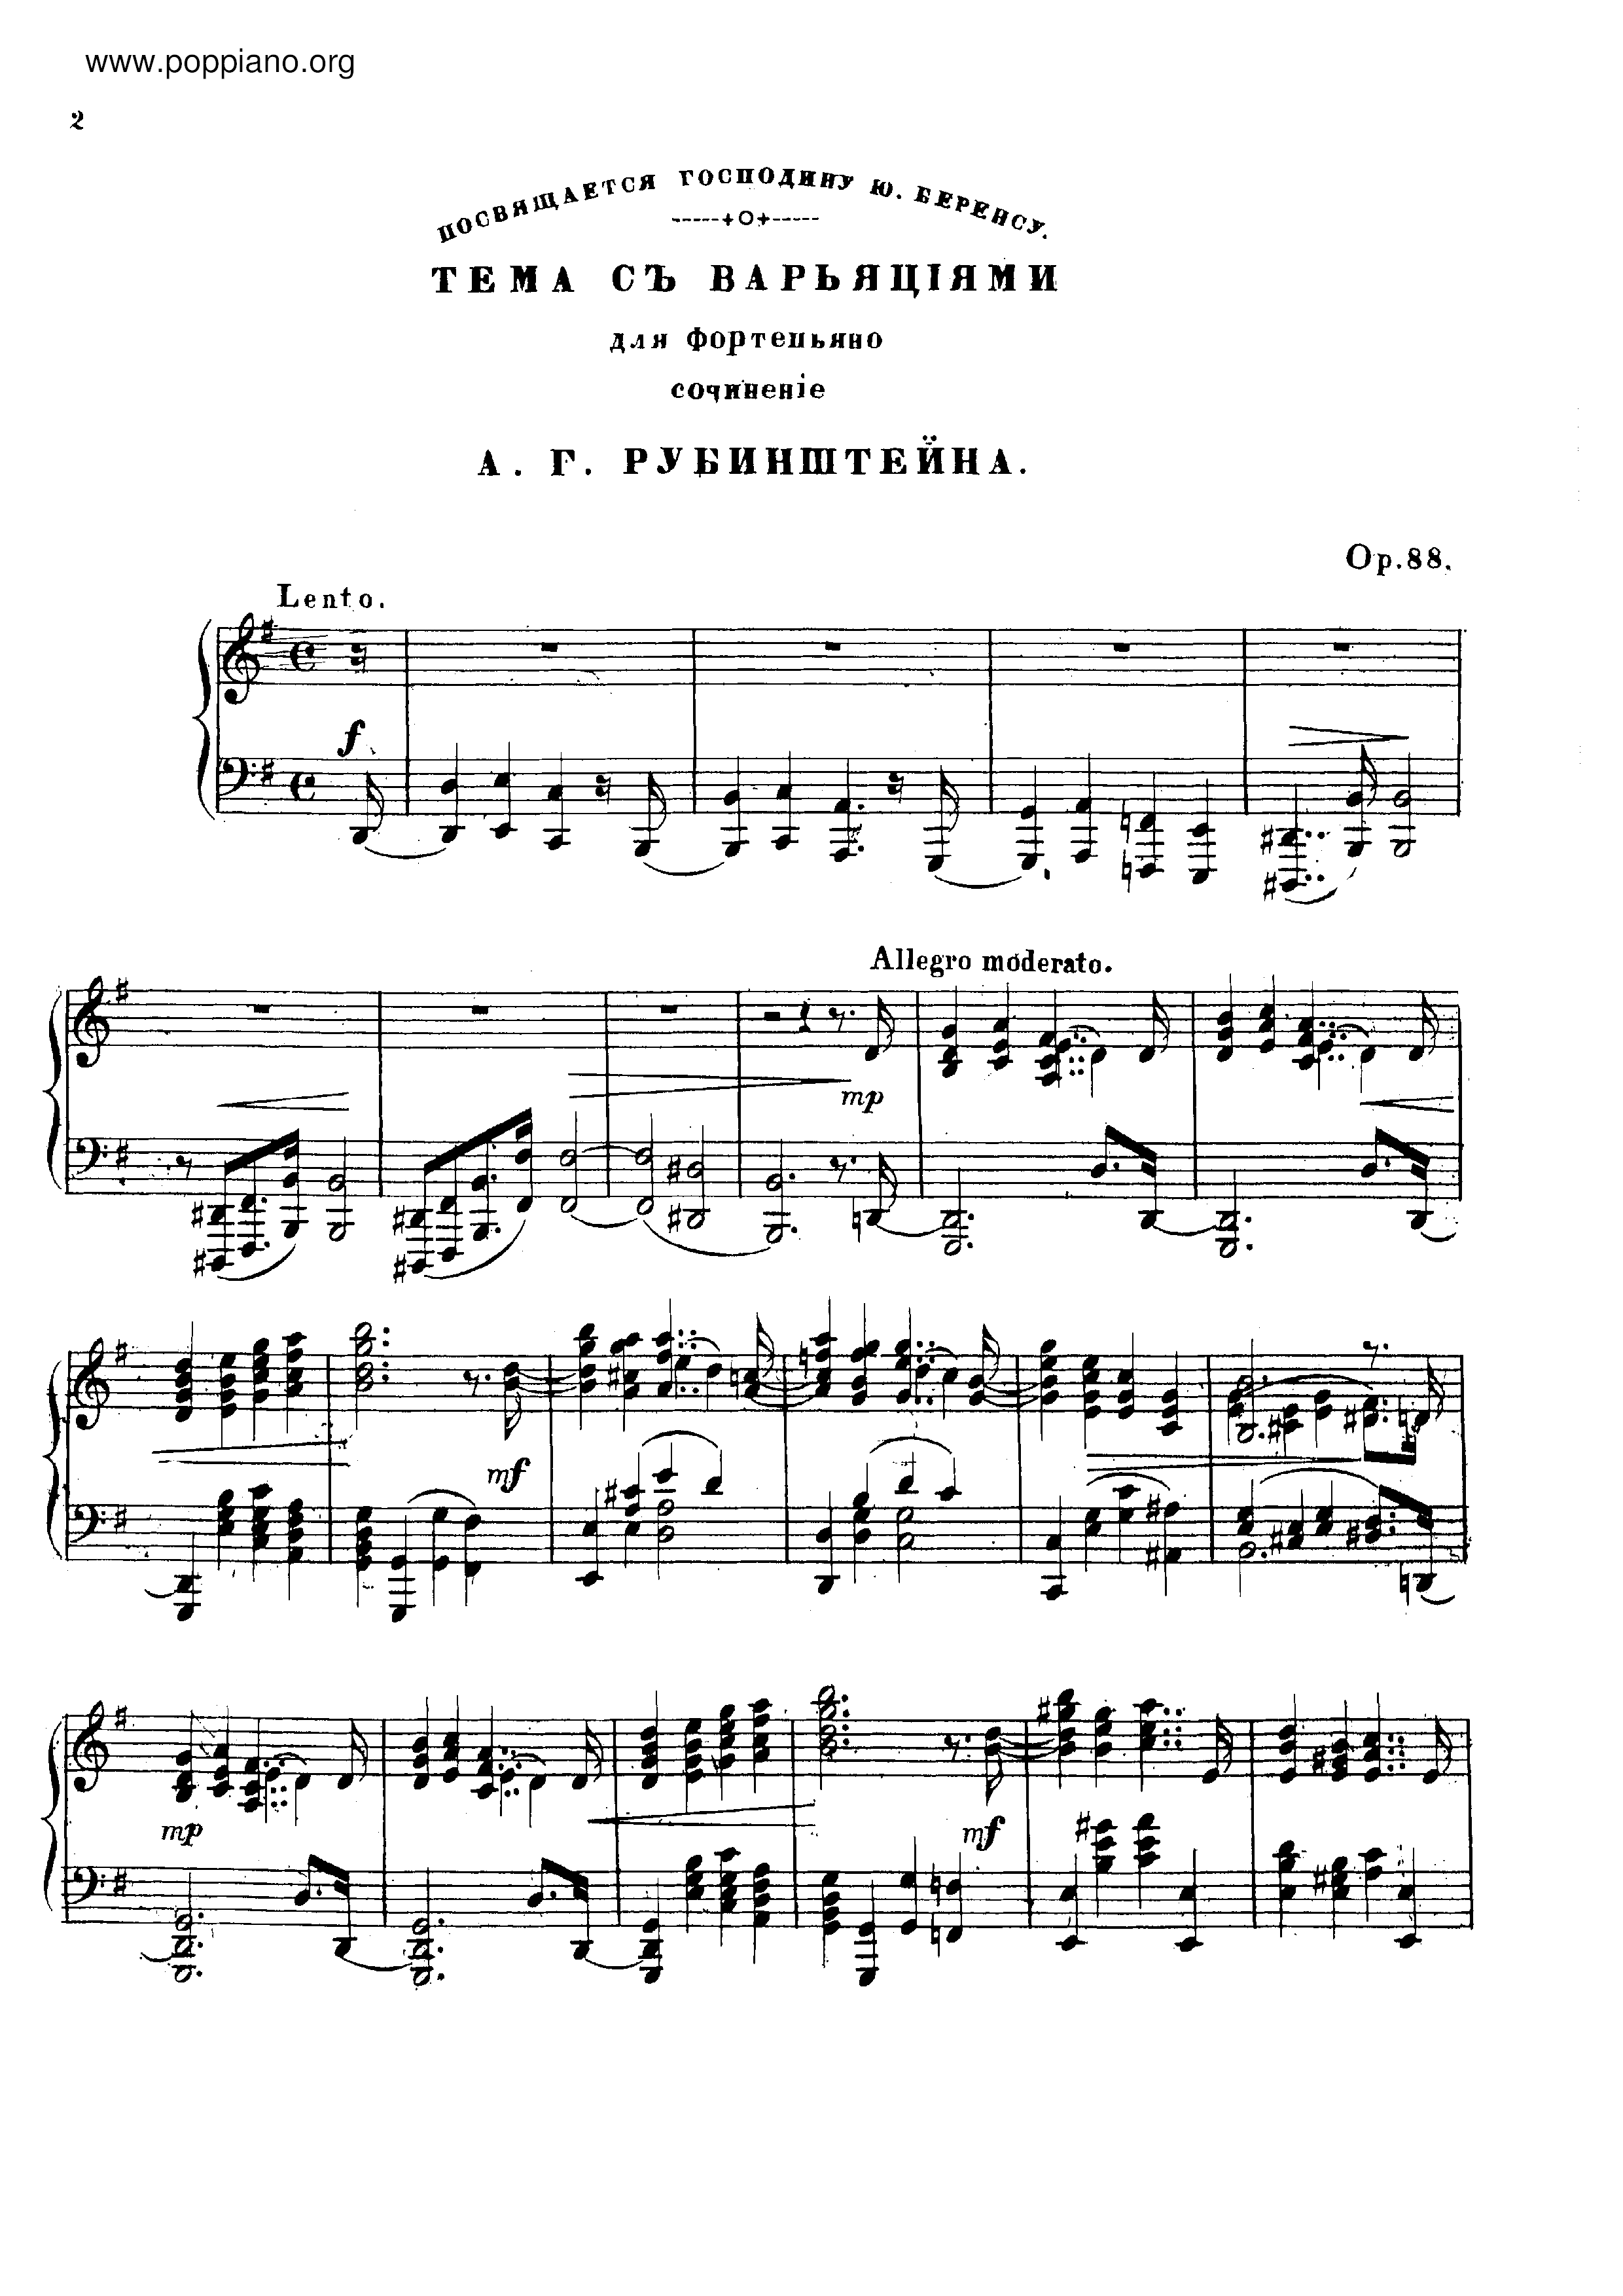 Theme and Variations, Op.88 Score